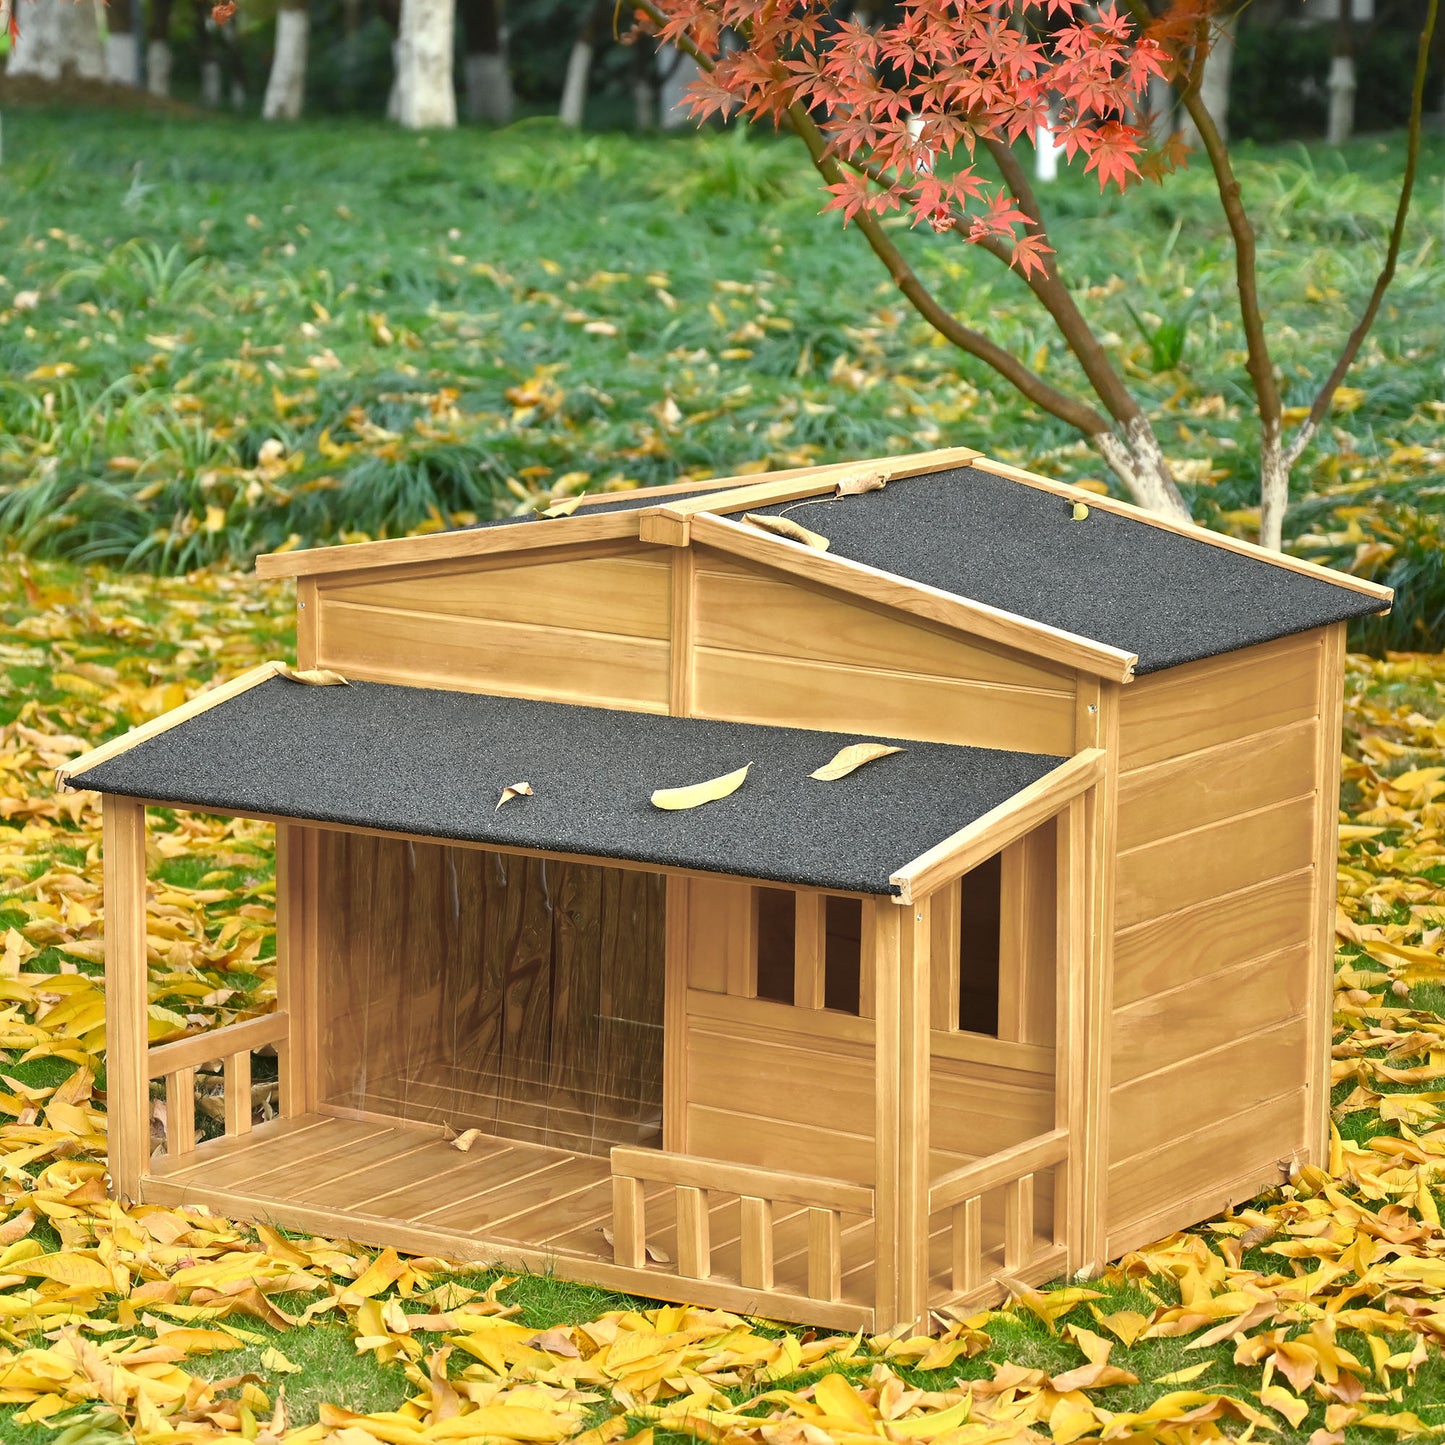 GO 47.2" Wooden Dog House, Outdoor & Indoor Dog Crate, Pet Kennel With Porch, Solid Wood, Weatherproof,  Medium, Nature